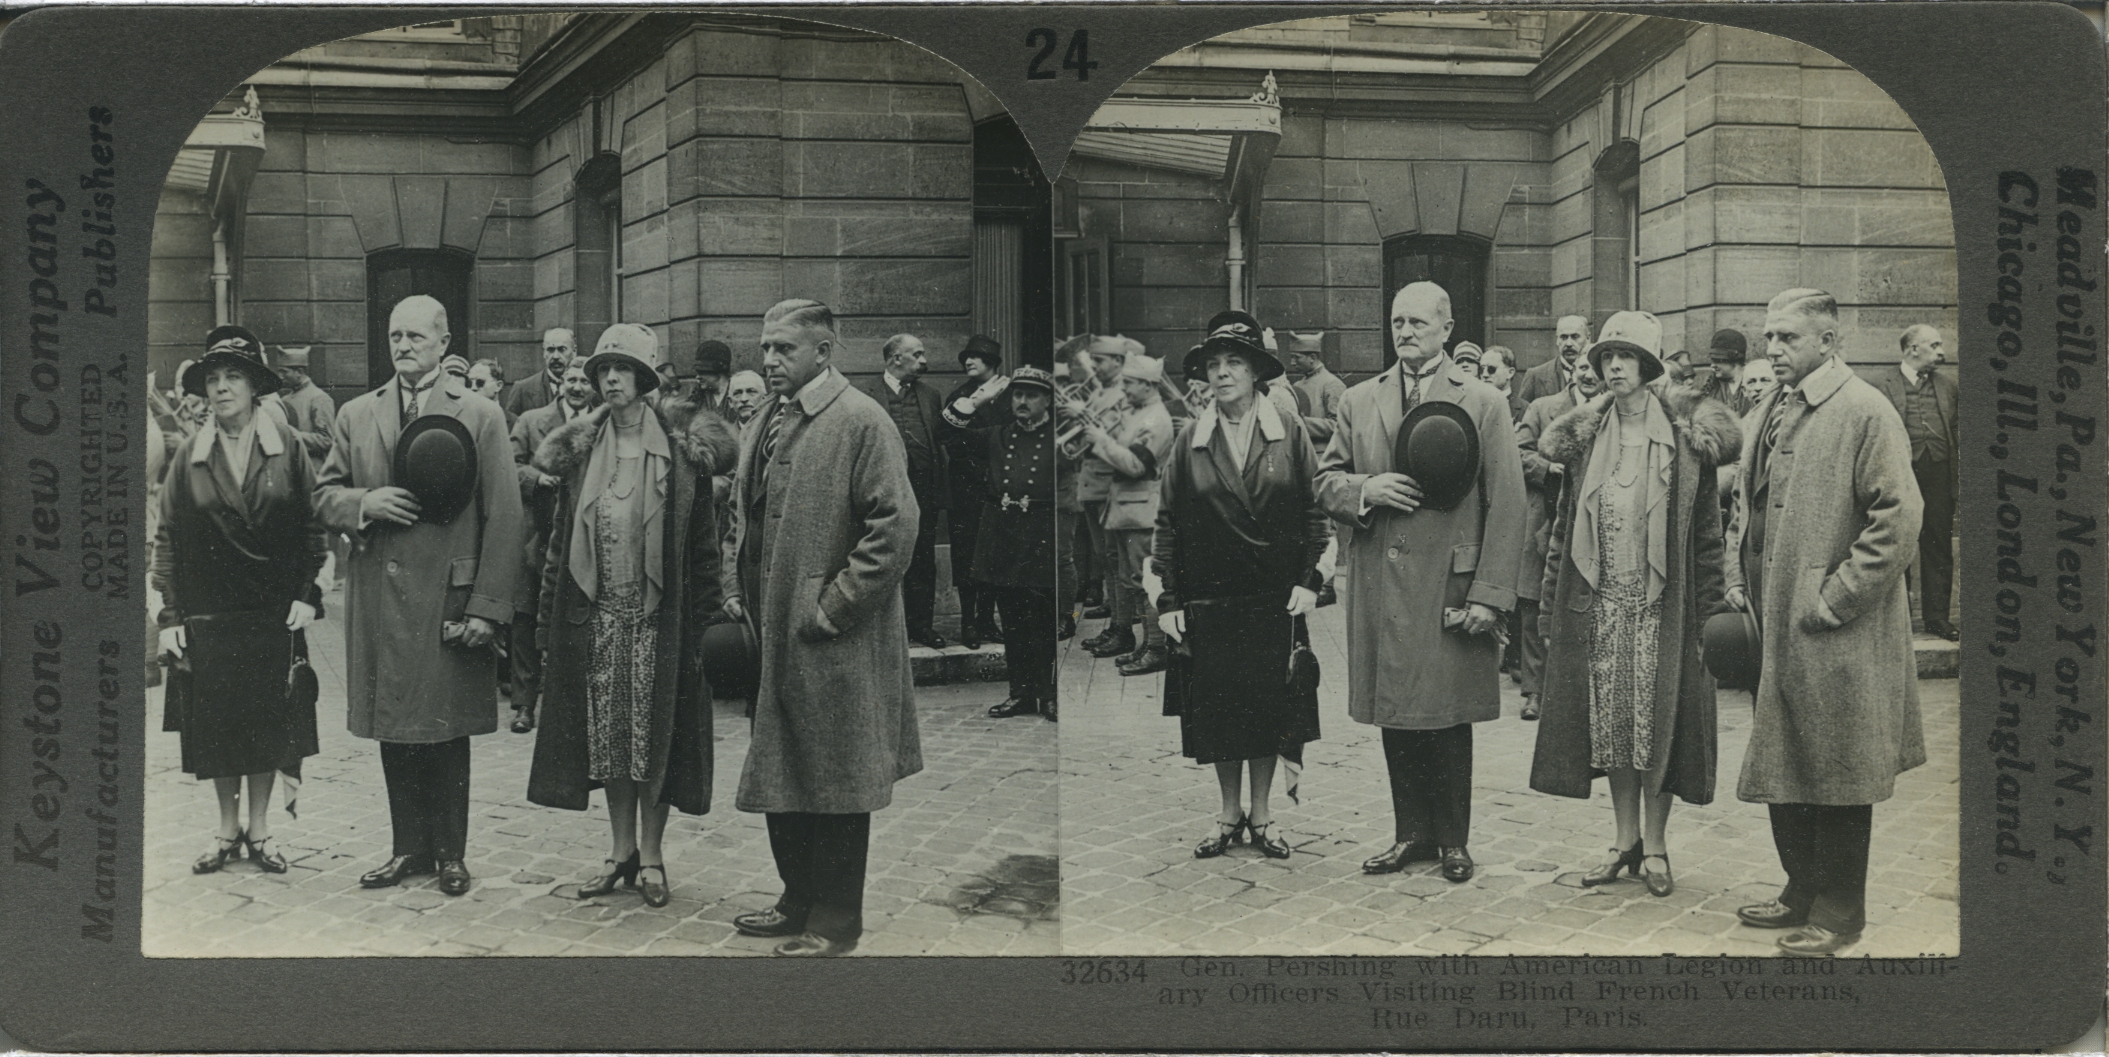 Gen. Pershing with American Legion and Auxiliary Officers Visiting Blind French Veterans, Rue Daru, Paris.